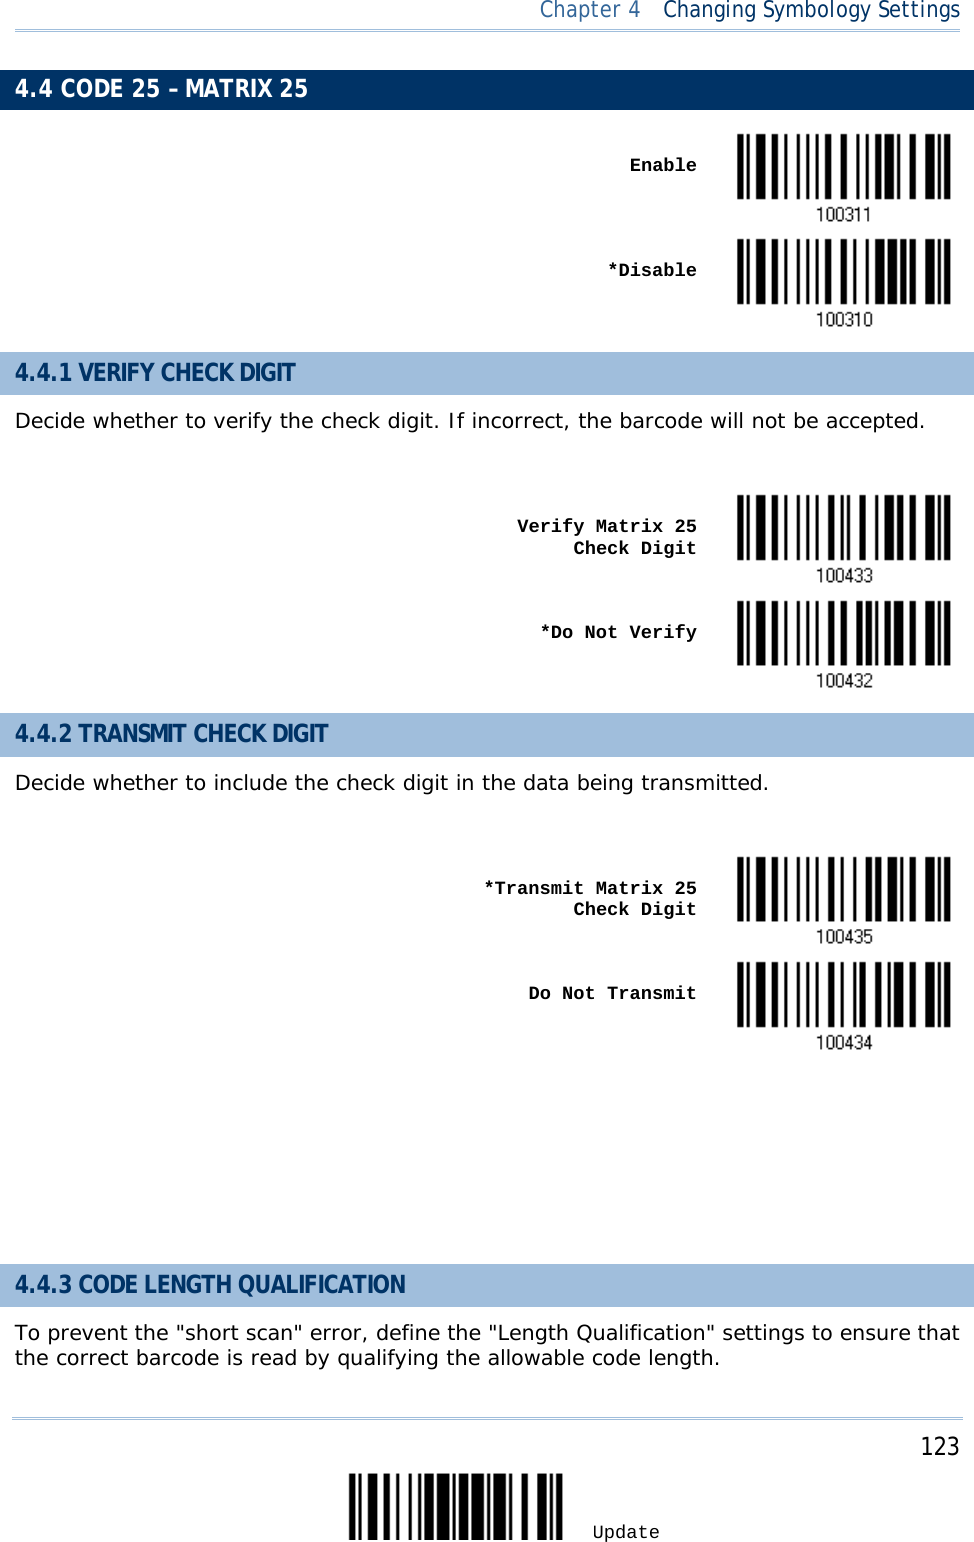  Chapter 4  Changing Symbology Settings  4.4 CODE 25 – MATRIX 25    Enable     *Disable  4.4.1 VERIFY CHECK DIGIT Decide whether to verify the check digit. If incorrect, the barcode will not be accepted.     Verify Matrix 25 Check Digit     *Do Not Verify  4.4.2 TRANSMIT CHECK DIGIT Decide whether to include the check digit in the data being transmitted.     *Transmit Matrix 25 Check Digit     Do Not Transmit       4.4.3 CODE LENGTH QUALIFICATION To prevent the &quot;short scan&quot; error, define the &quot;Length Qualification&quot; settings to ensure that the correct barcode is read by qualifying the allowable code length.     123 Update 